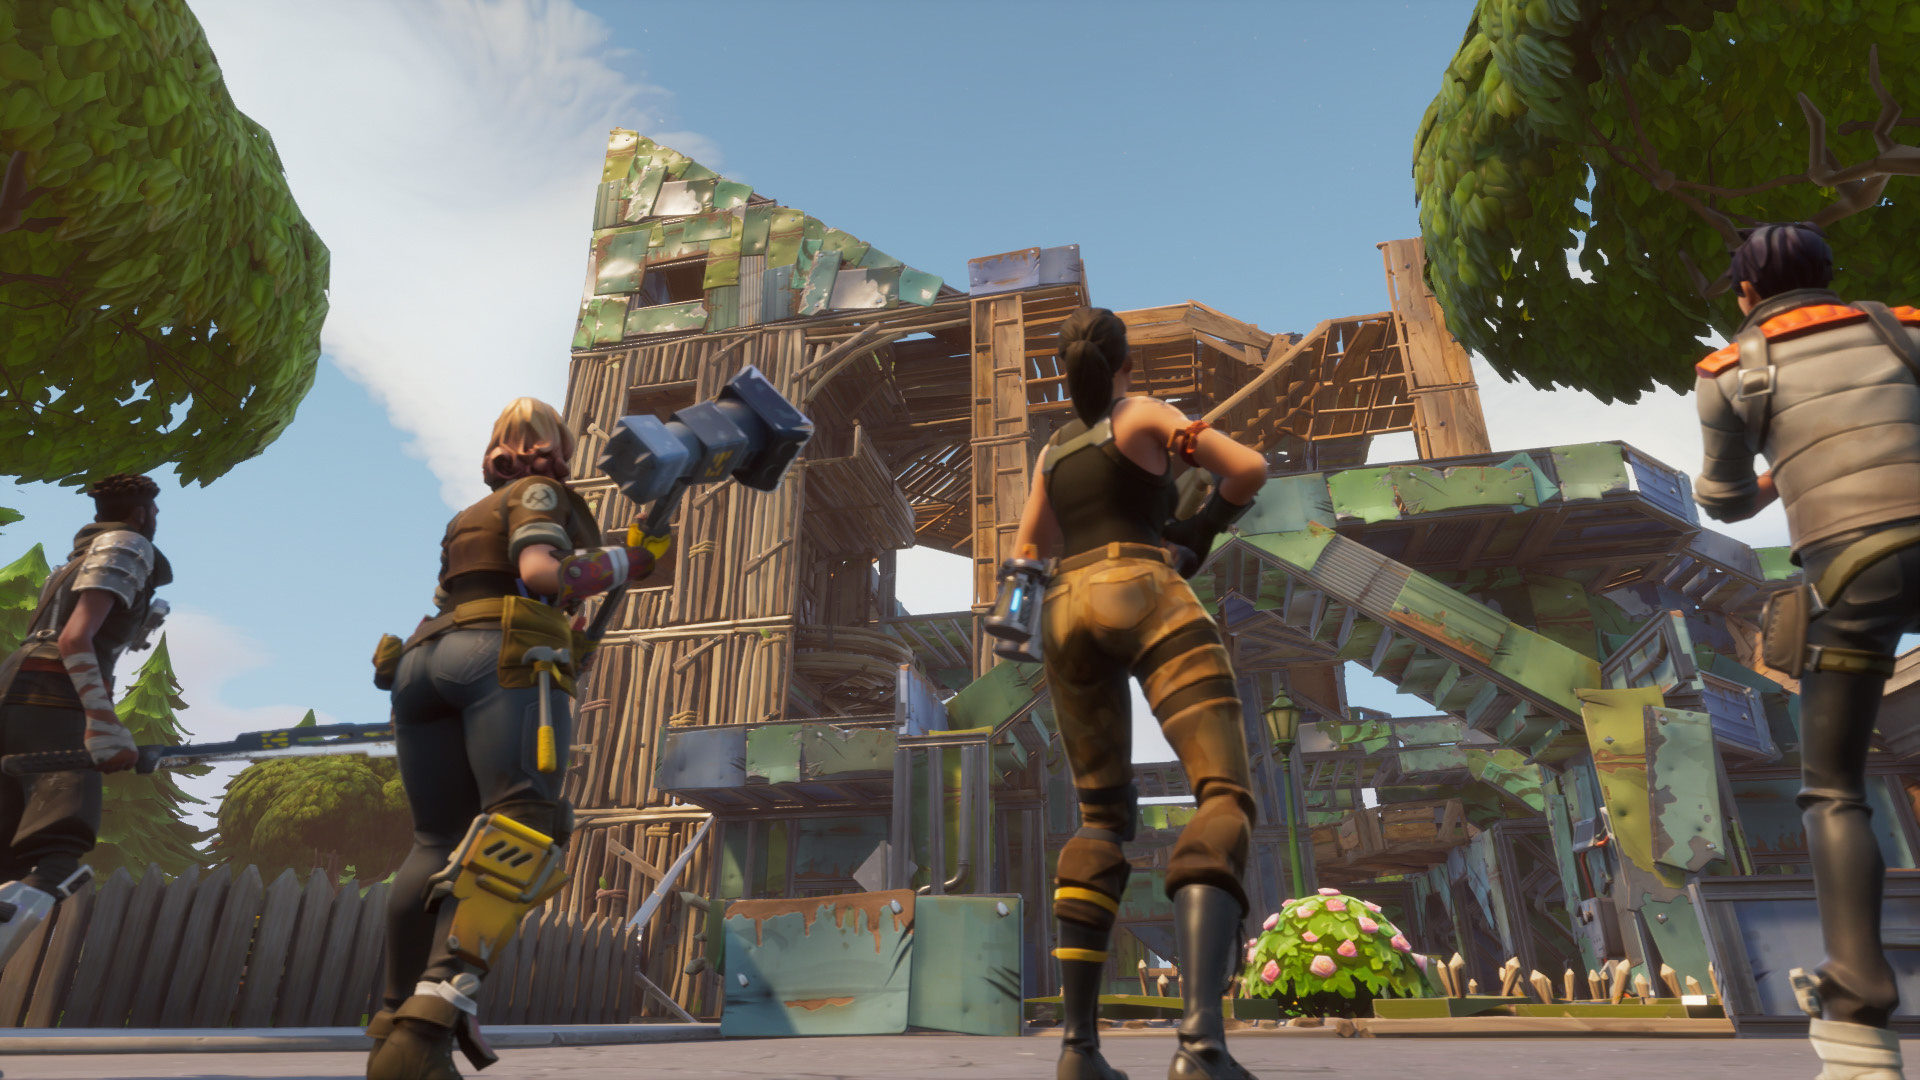 All Things You Can Build In Fortnite A Beginner S Guide To Building In Fortnite Dot Esports